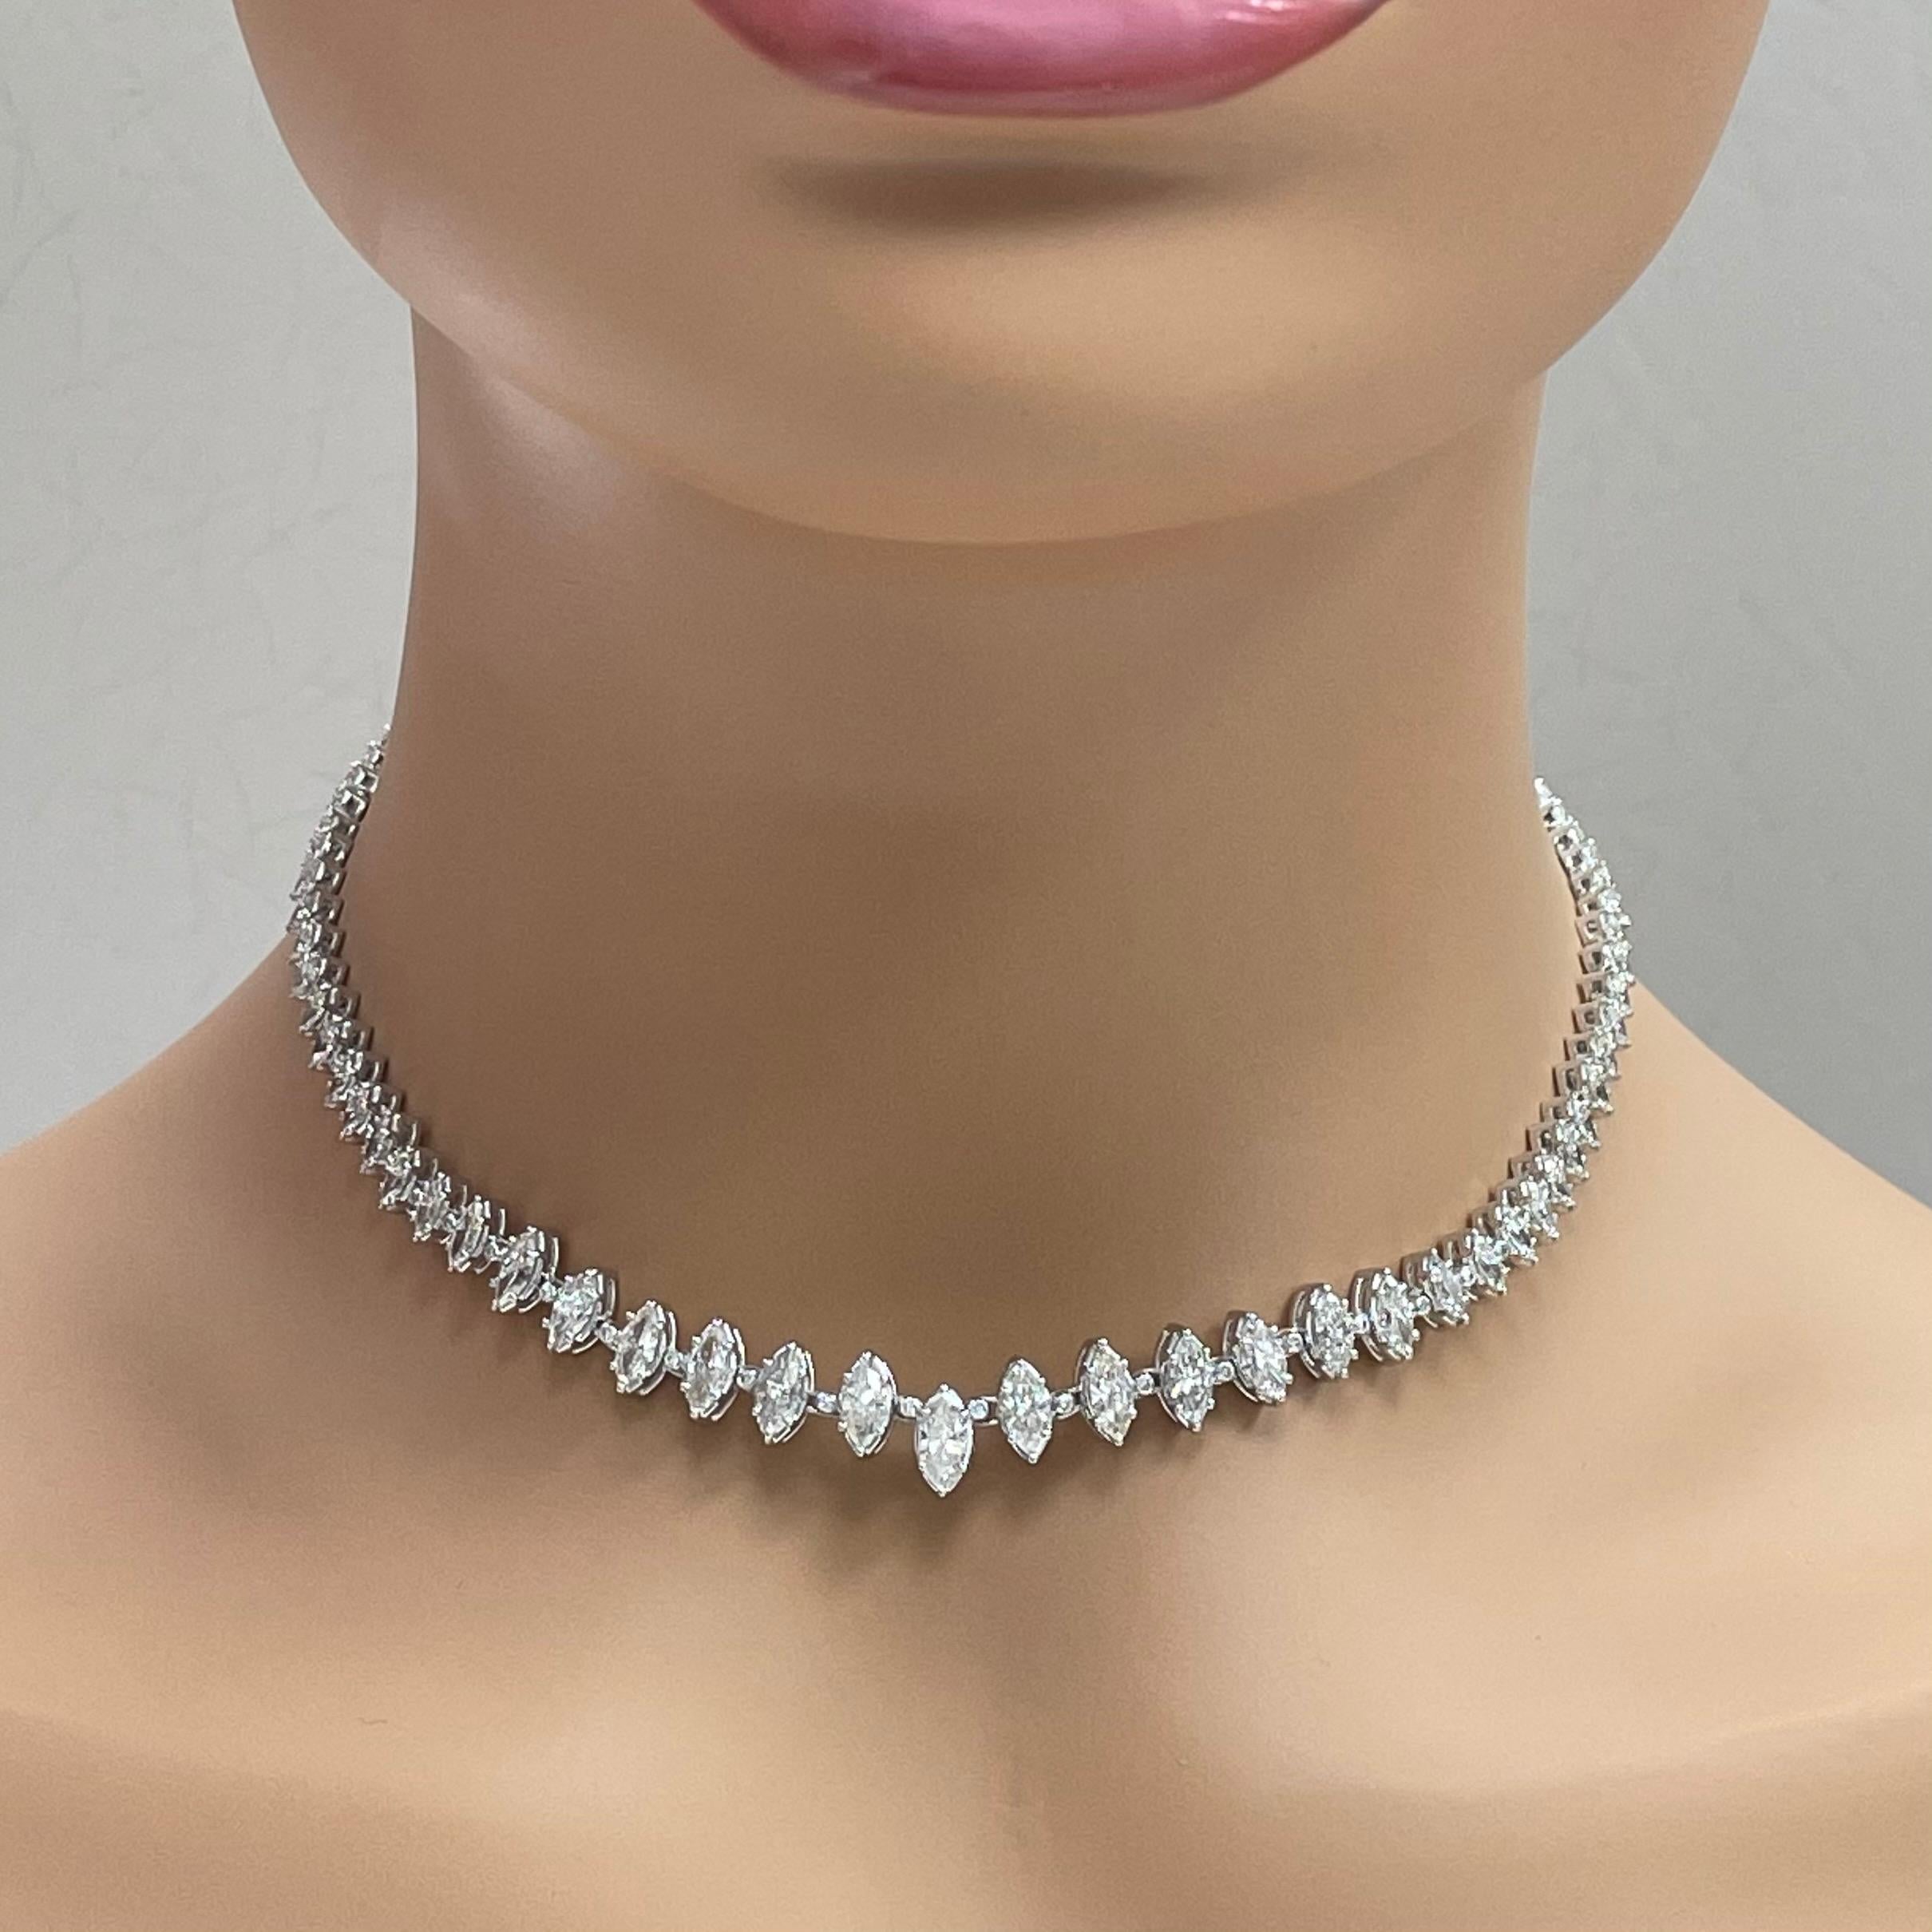 A classic and elegant everyday or occasional wear with graduating diamond sizes, this Tennis Necklace is a timeless and versatile piece of jewelry. A unique adaptation of a classic style, even the links are encrusted with diamonds. All our necklaces